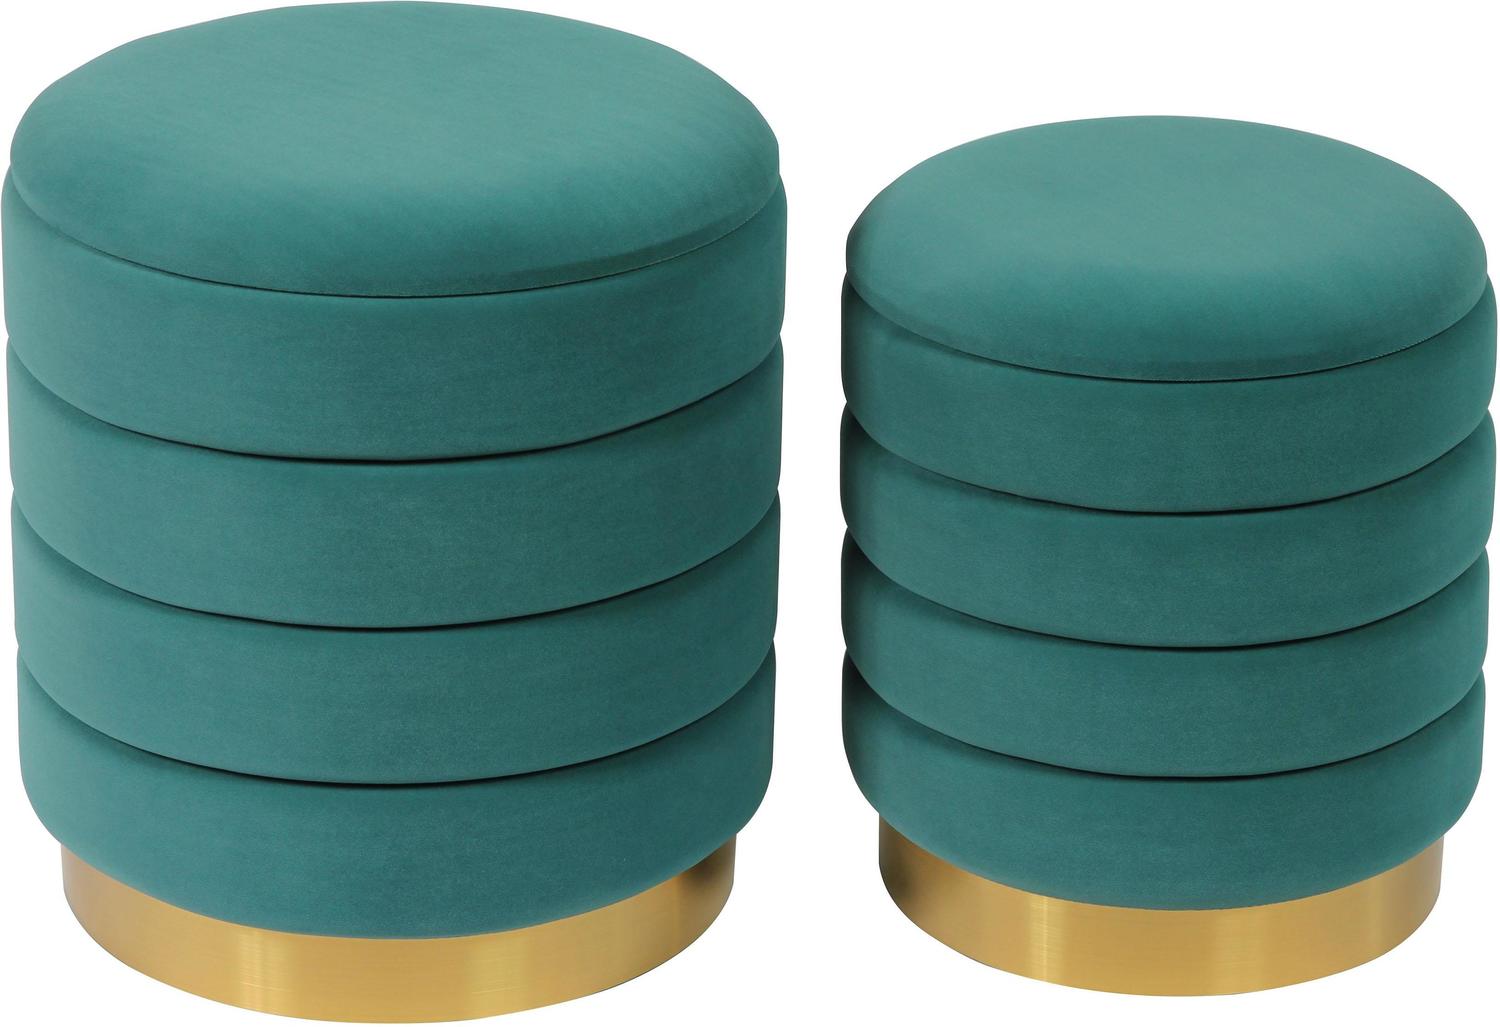 leather bench with arms Contemporary Design Furniture Ottomans Teal